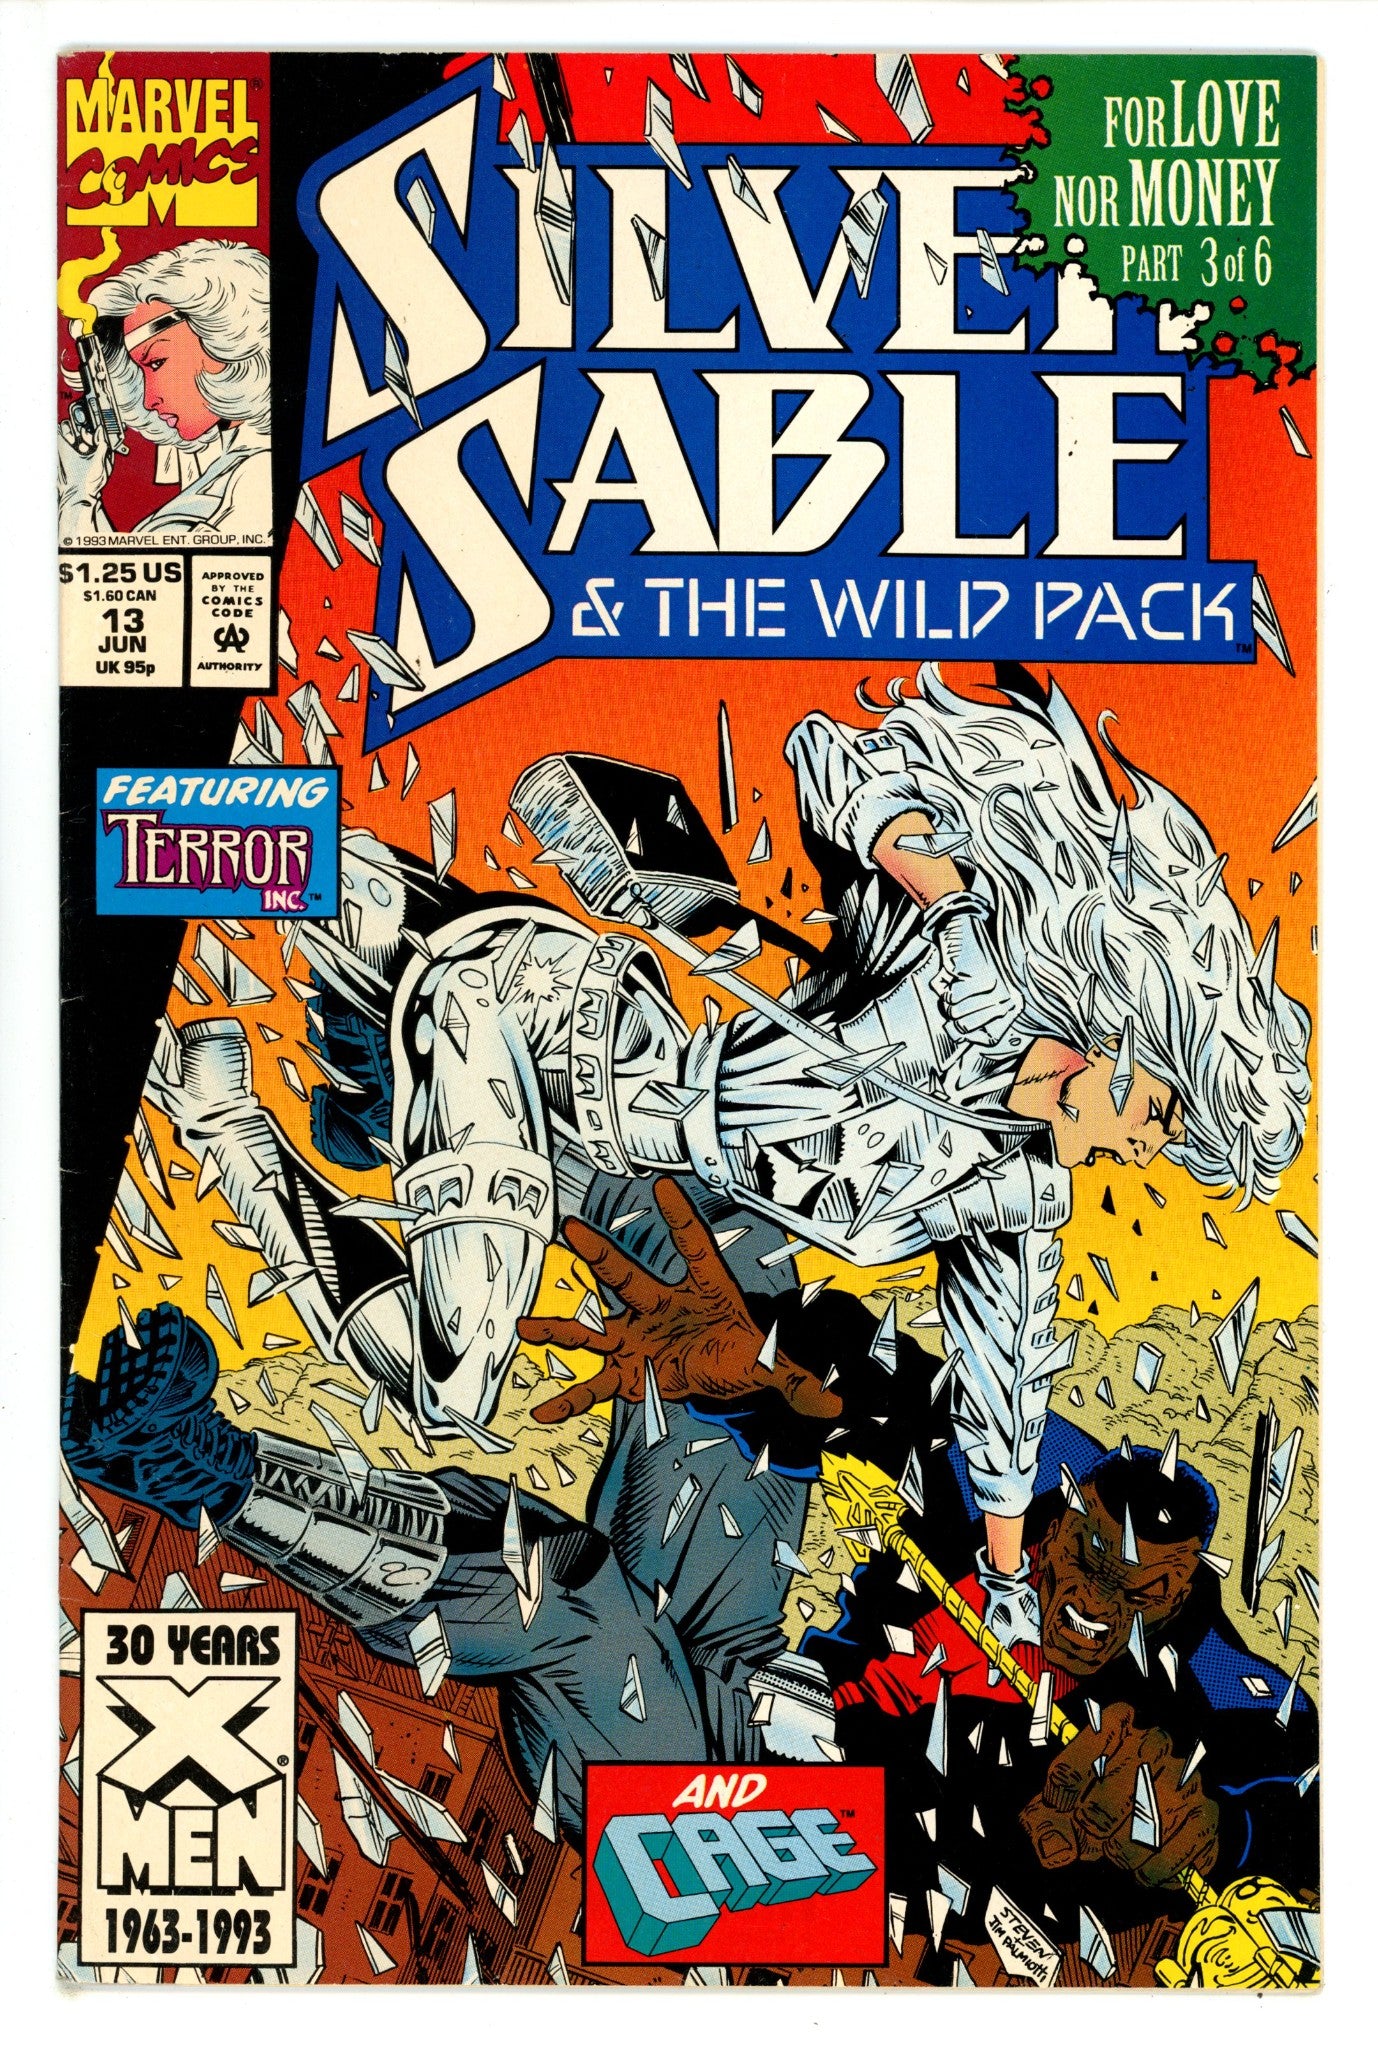 Silver Sable and the Wild Pack 13 (1993)